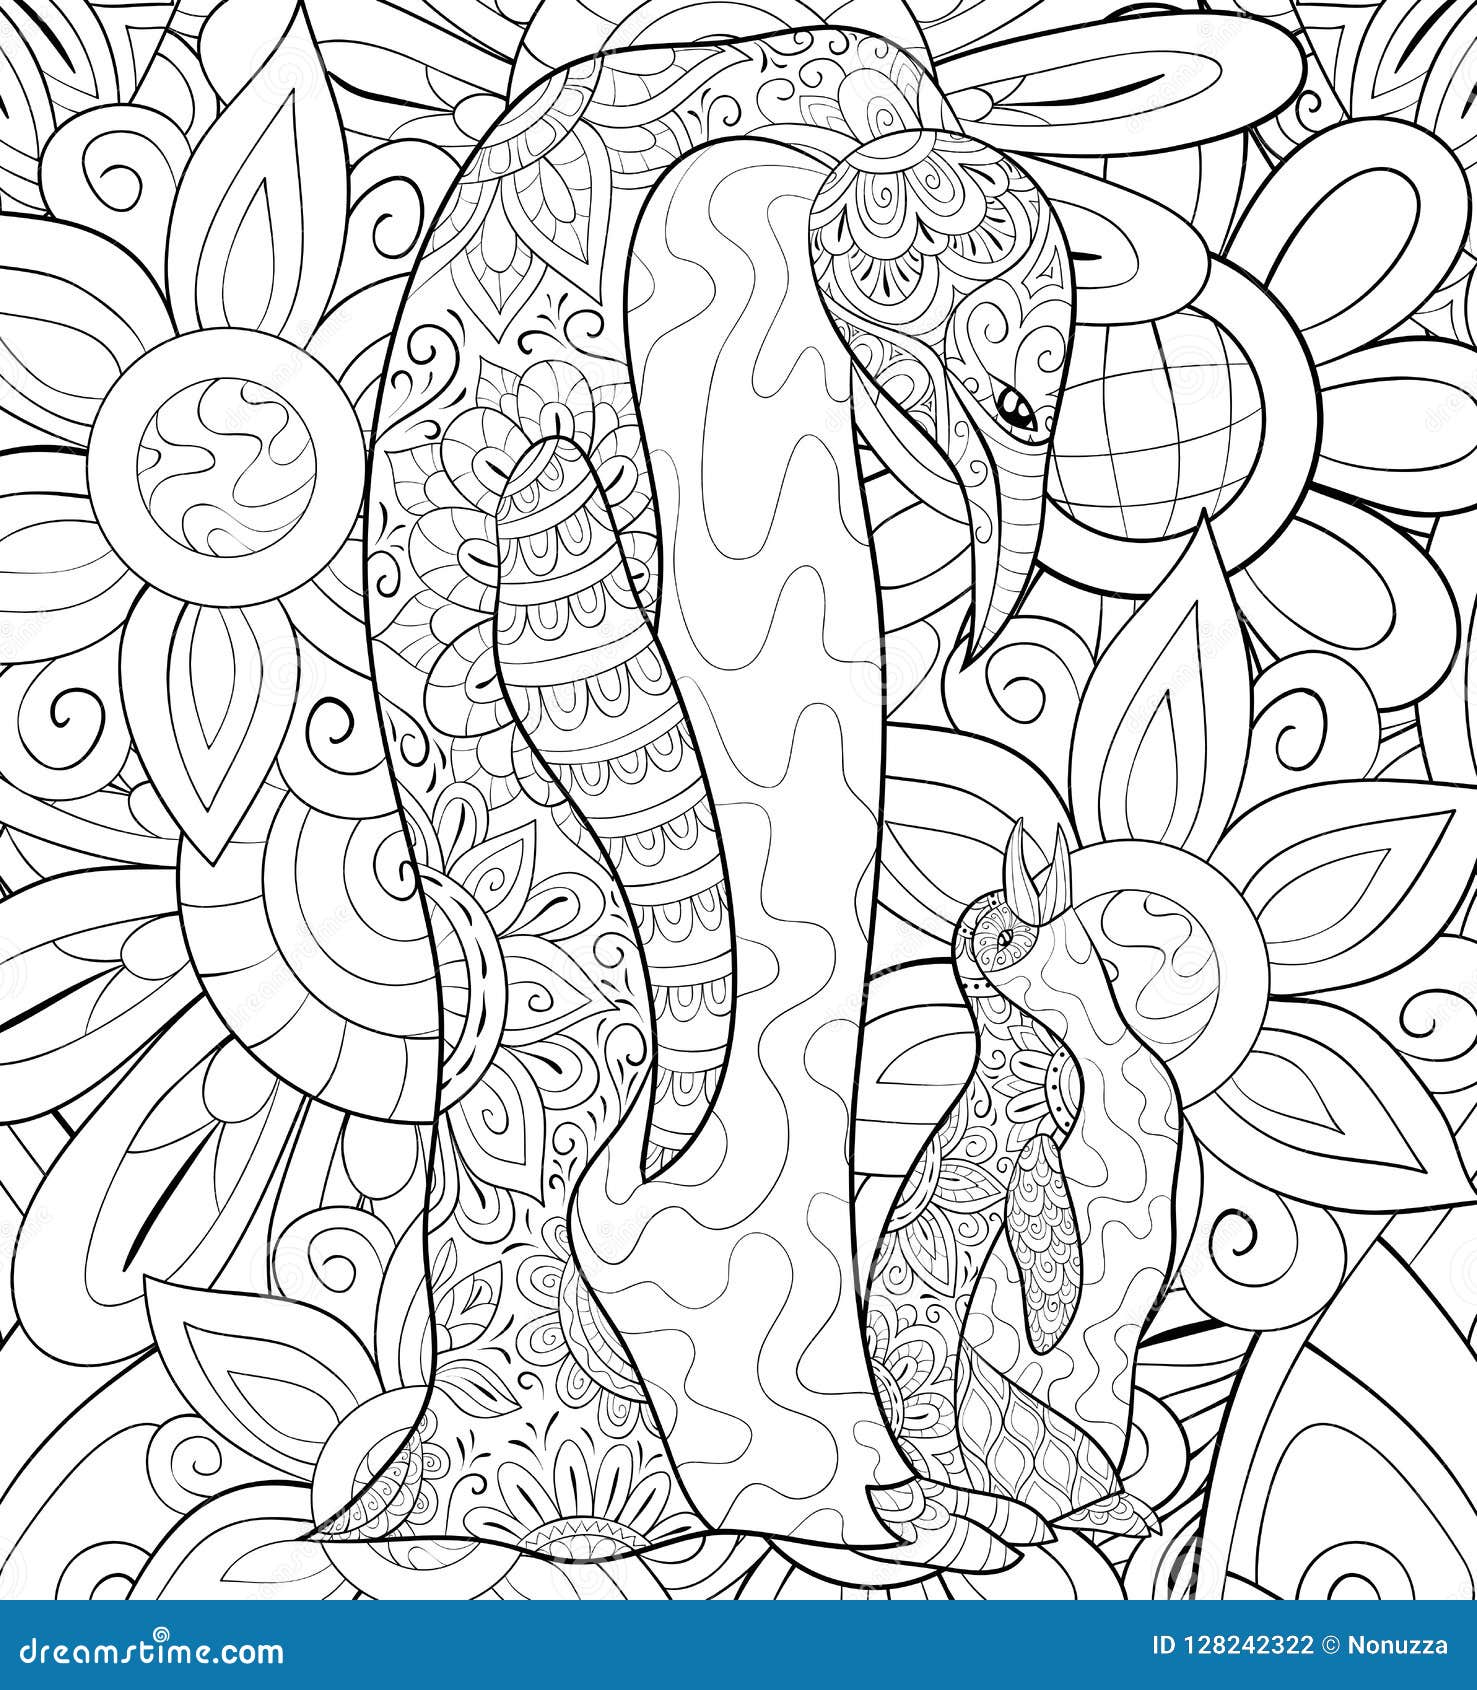 Adult Coloring Book,page a Cute Family of Penguins Image for ...